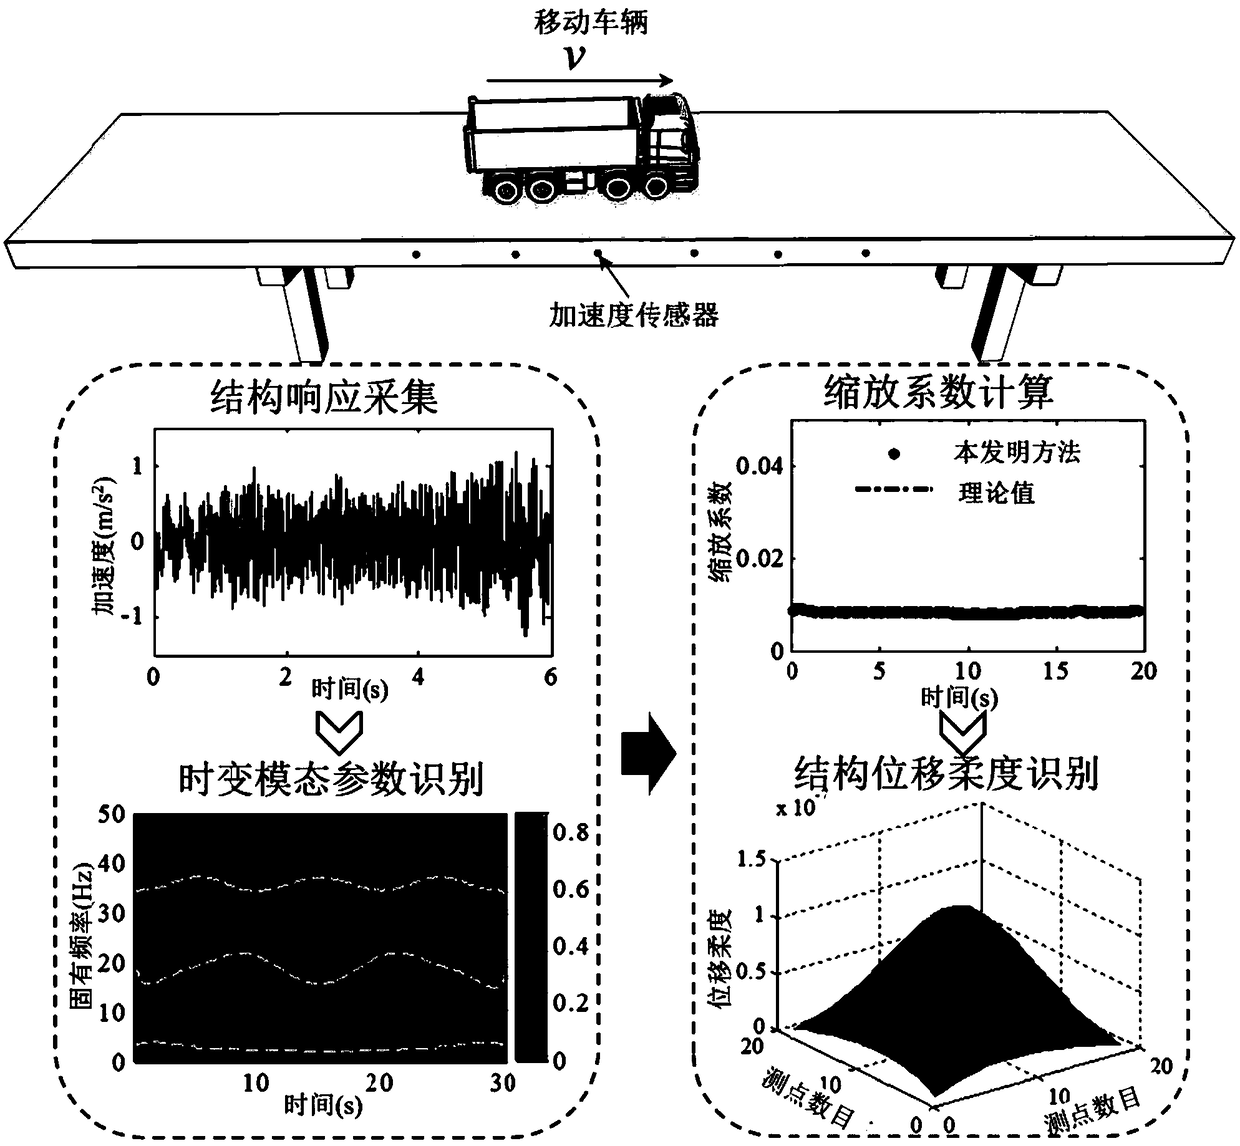 Rapid bridge testing and estimation method based on change of time-varying dynamic characteristics of axle coupling system